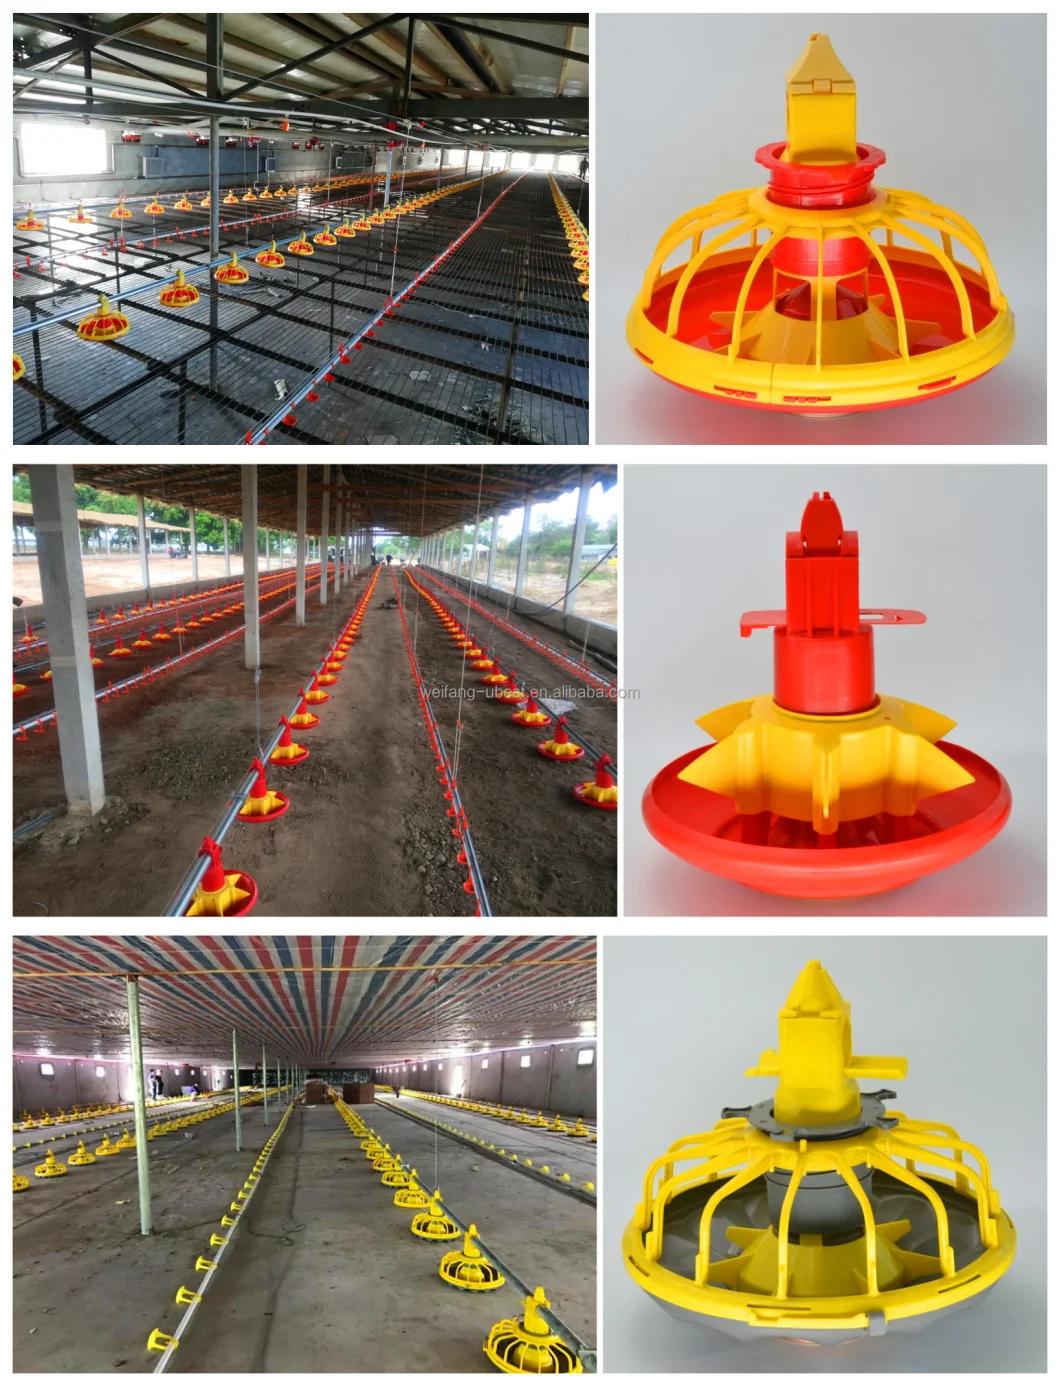 Automatic Poultry Farm Chicken Broiler Feeding System